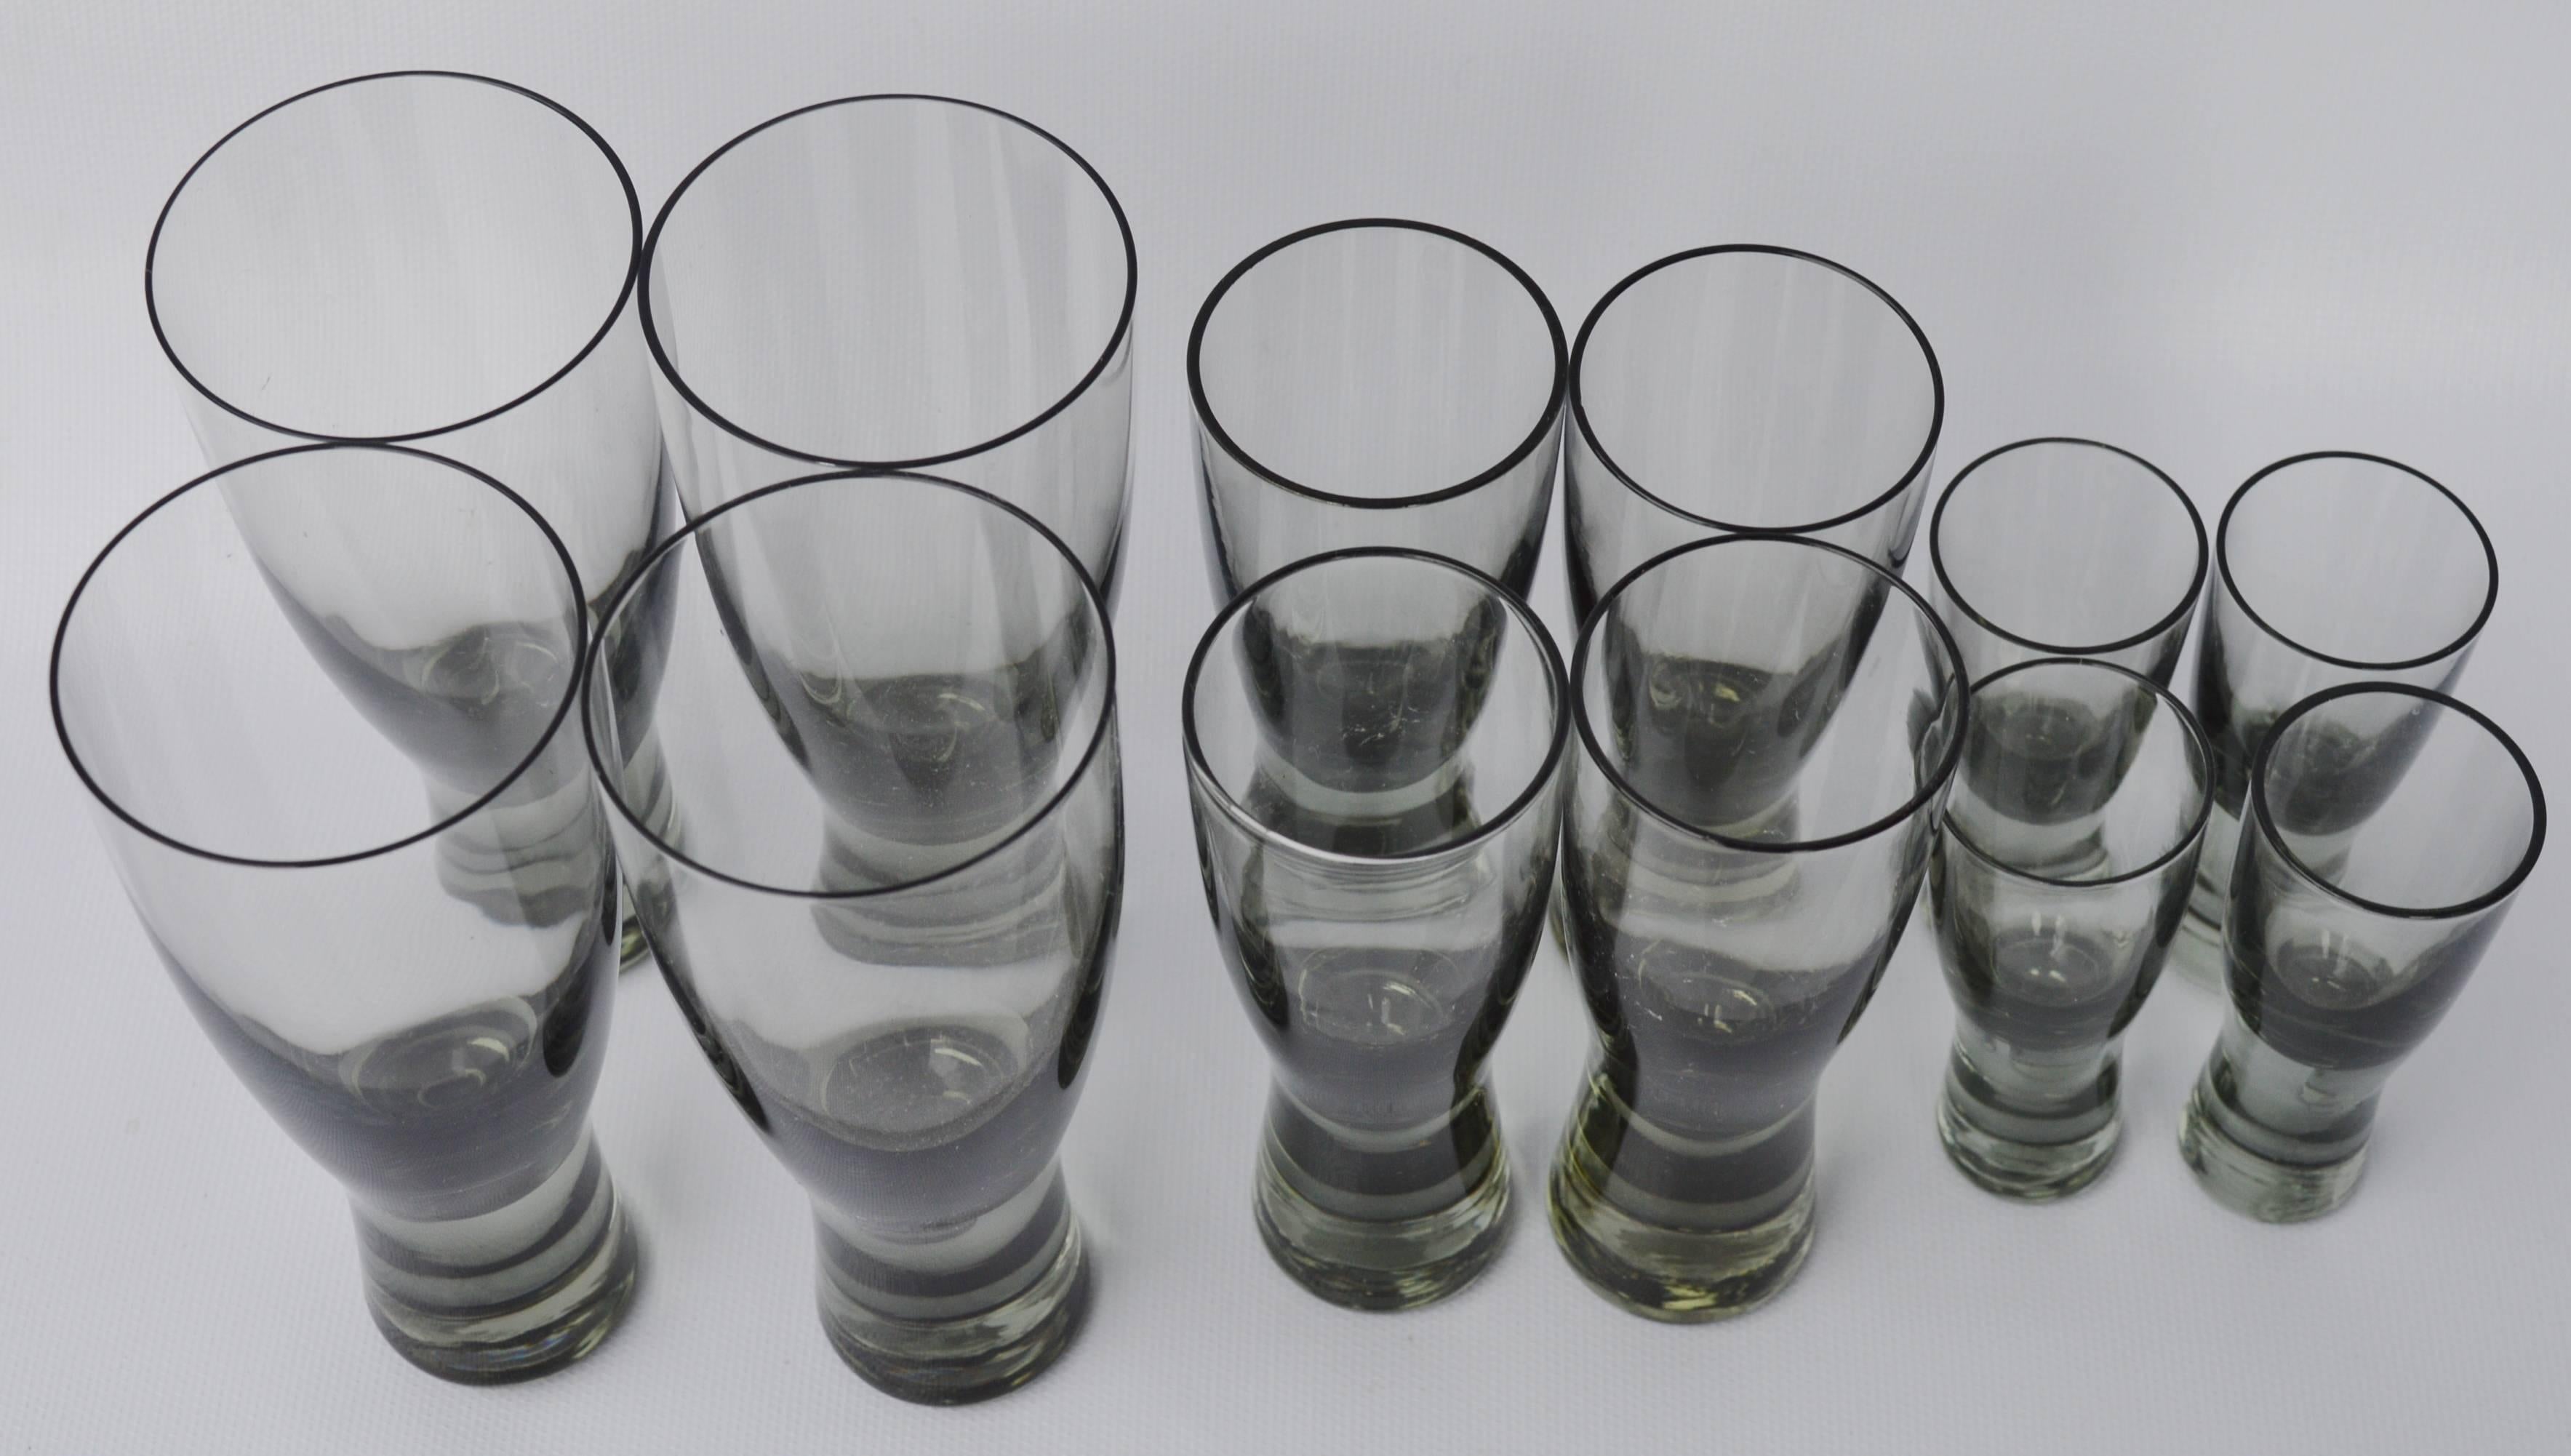 This delightful set of 12 per Lutkin smoked glasses for Holmegaard have a very pleasing shape. In perfect condition, the set consists of four each of the cordial, aperitif and wine glasses. The dimensions below are for the wine glasses. The aperitif